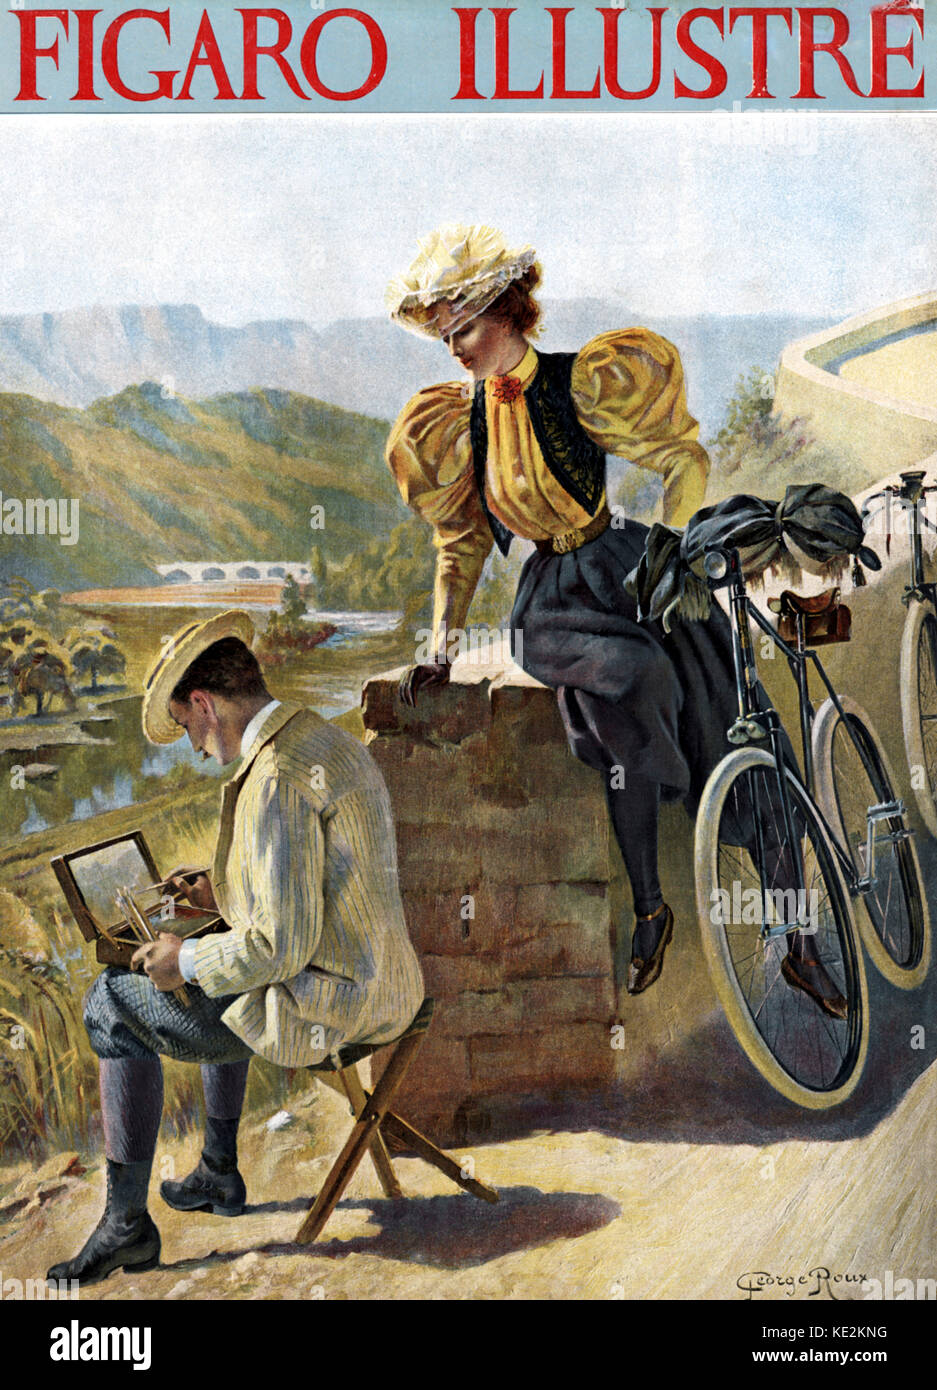 Young woman watching man paint landscape - Cover of Figaro Illustré. Woman is wearing typical 19th century outfit with leg of mutton sleeves, hat and gloves.  Man is wearing plus fours and a hat.  Their two bicycles are leaning against a low wall.    Illustration by George Roux 1853 - 1929 Stock Photo